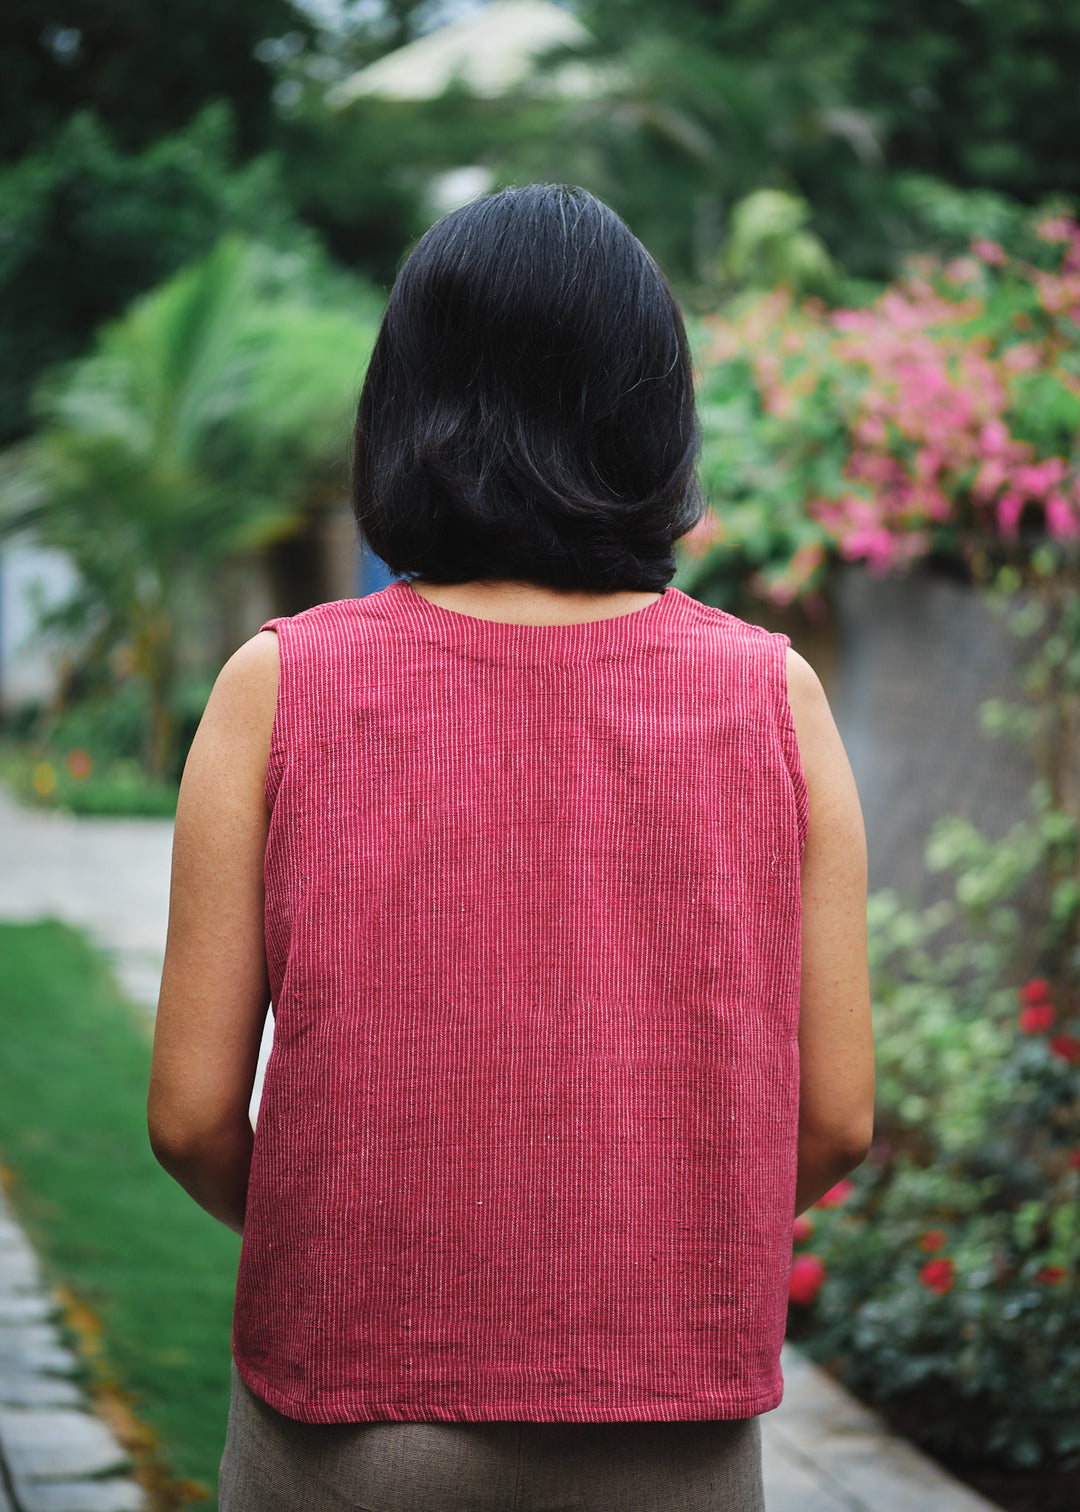 back view of a woman in a red sleeveless top